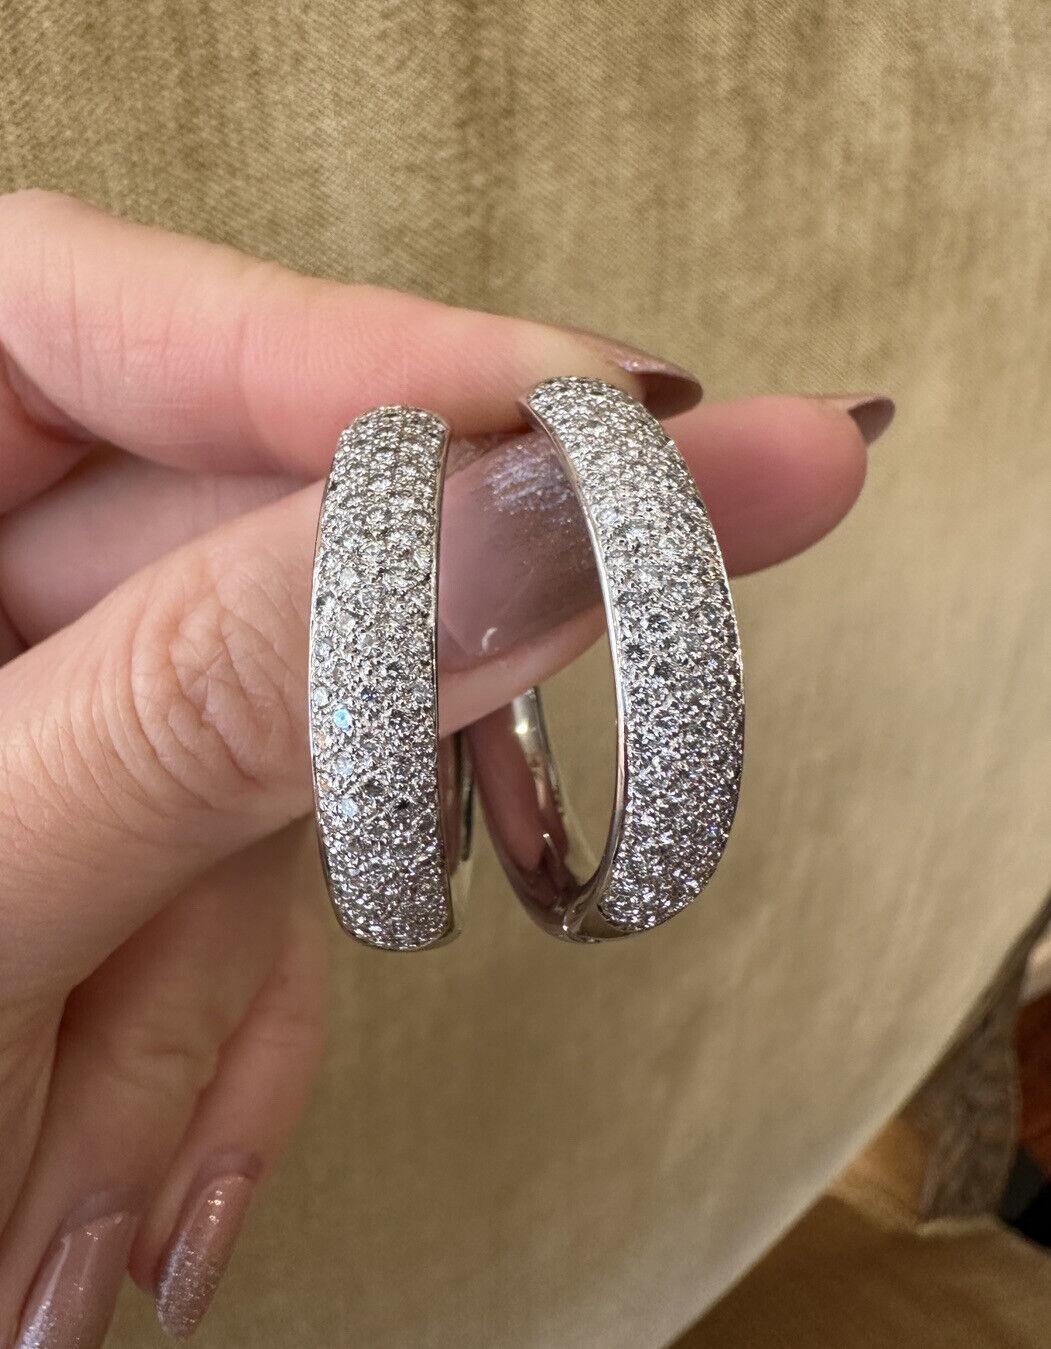 Round Hoop Pavé Diamond Earring in 18k White Gold

Round Hoop Pavé Diamond Earrings feature five rows of Round Full-cut Diamonds pavé set on the outside half, set in high-polished 18k White Gold

Total diamond weight is 3.30 carats.
The earrings